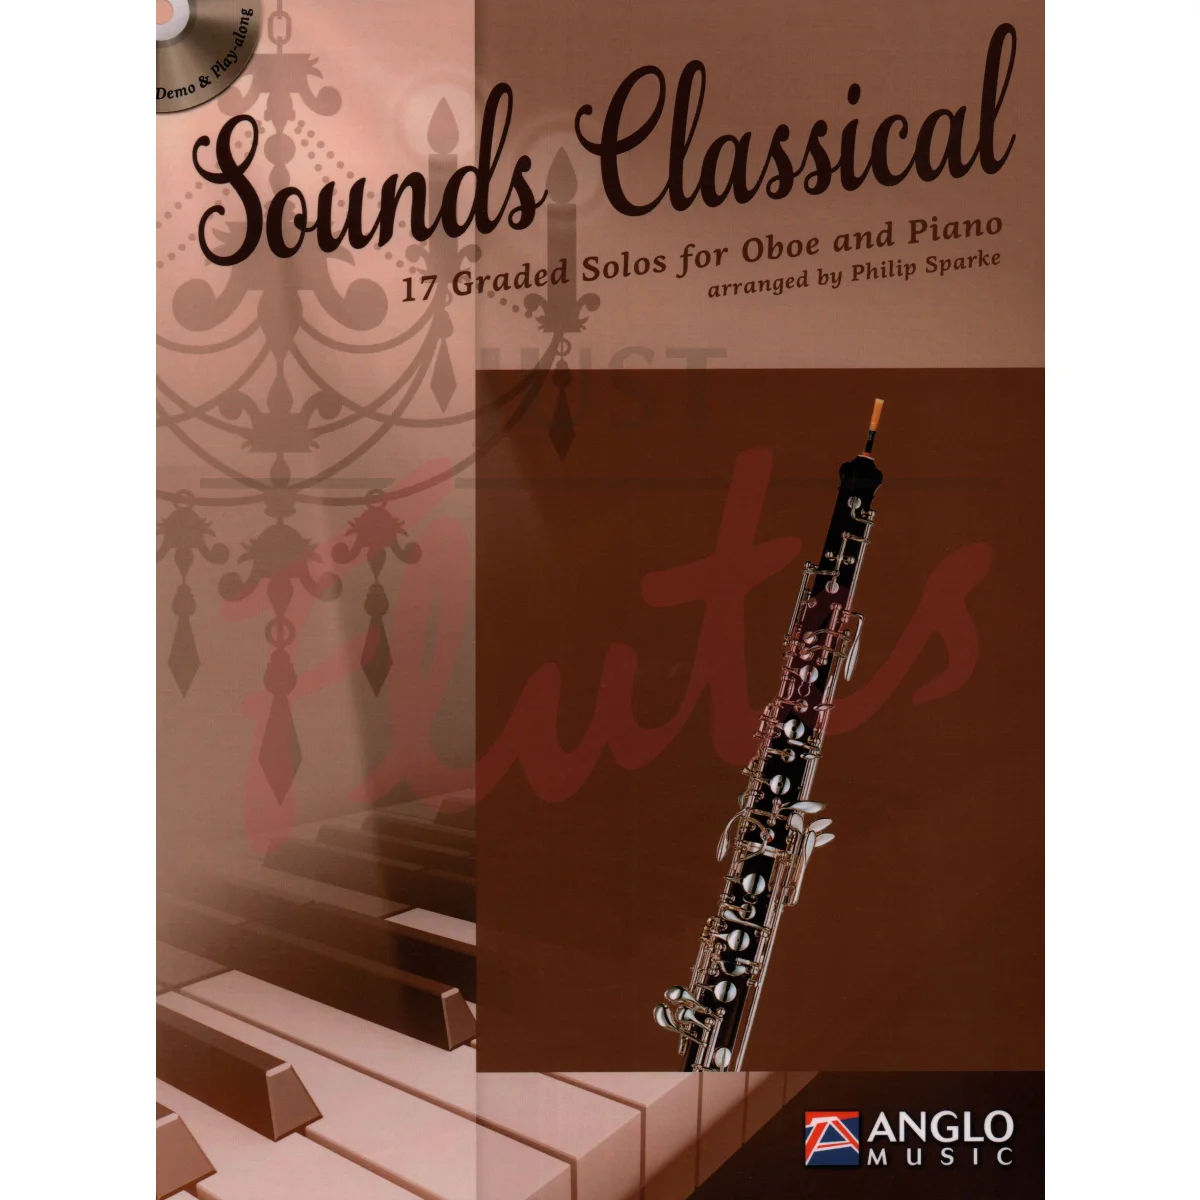 Sounds Classical [Oboe]